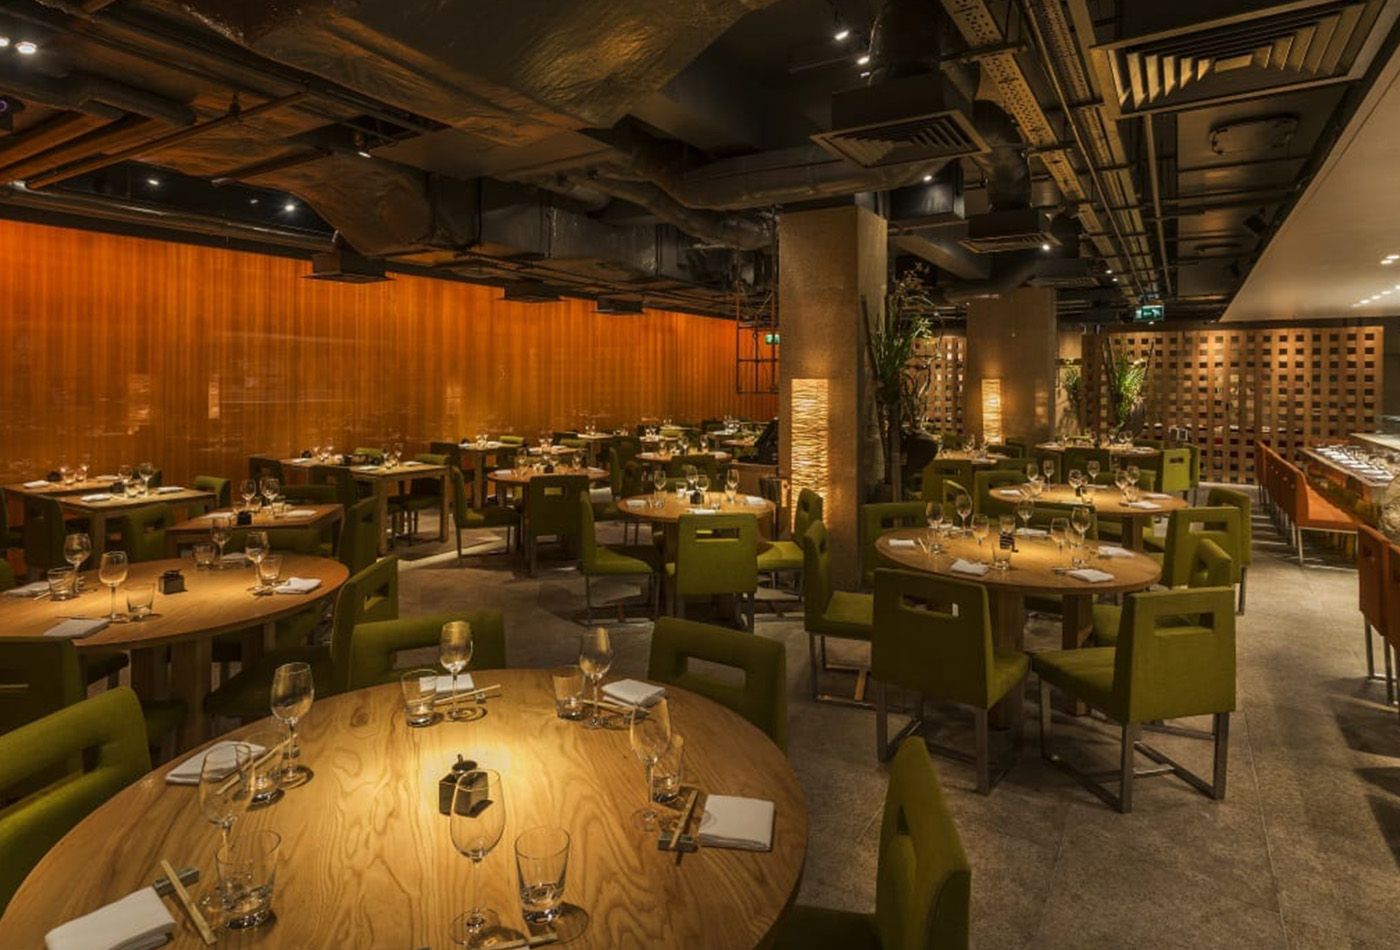 Modern restaurant made up of round tables, wooden feature wall and green fabric chairs